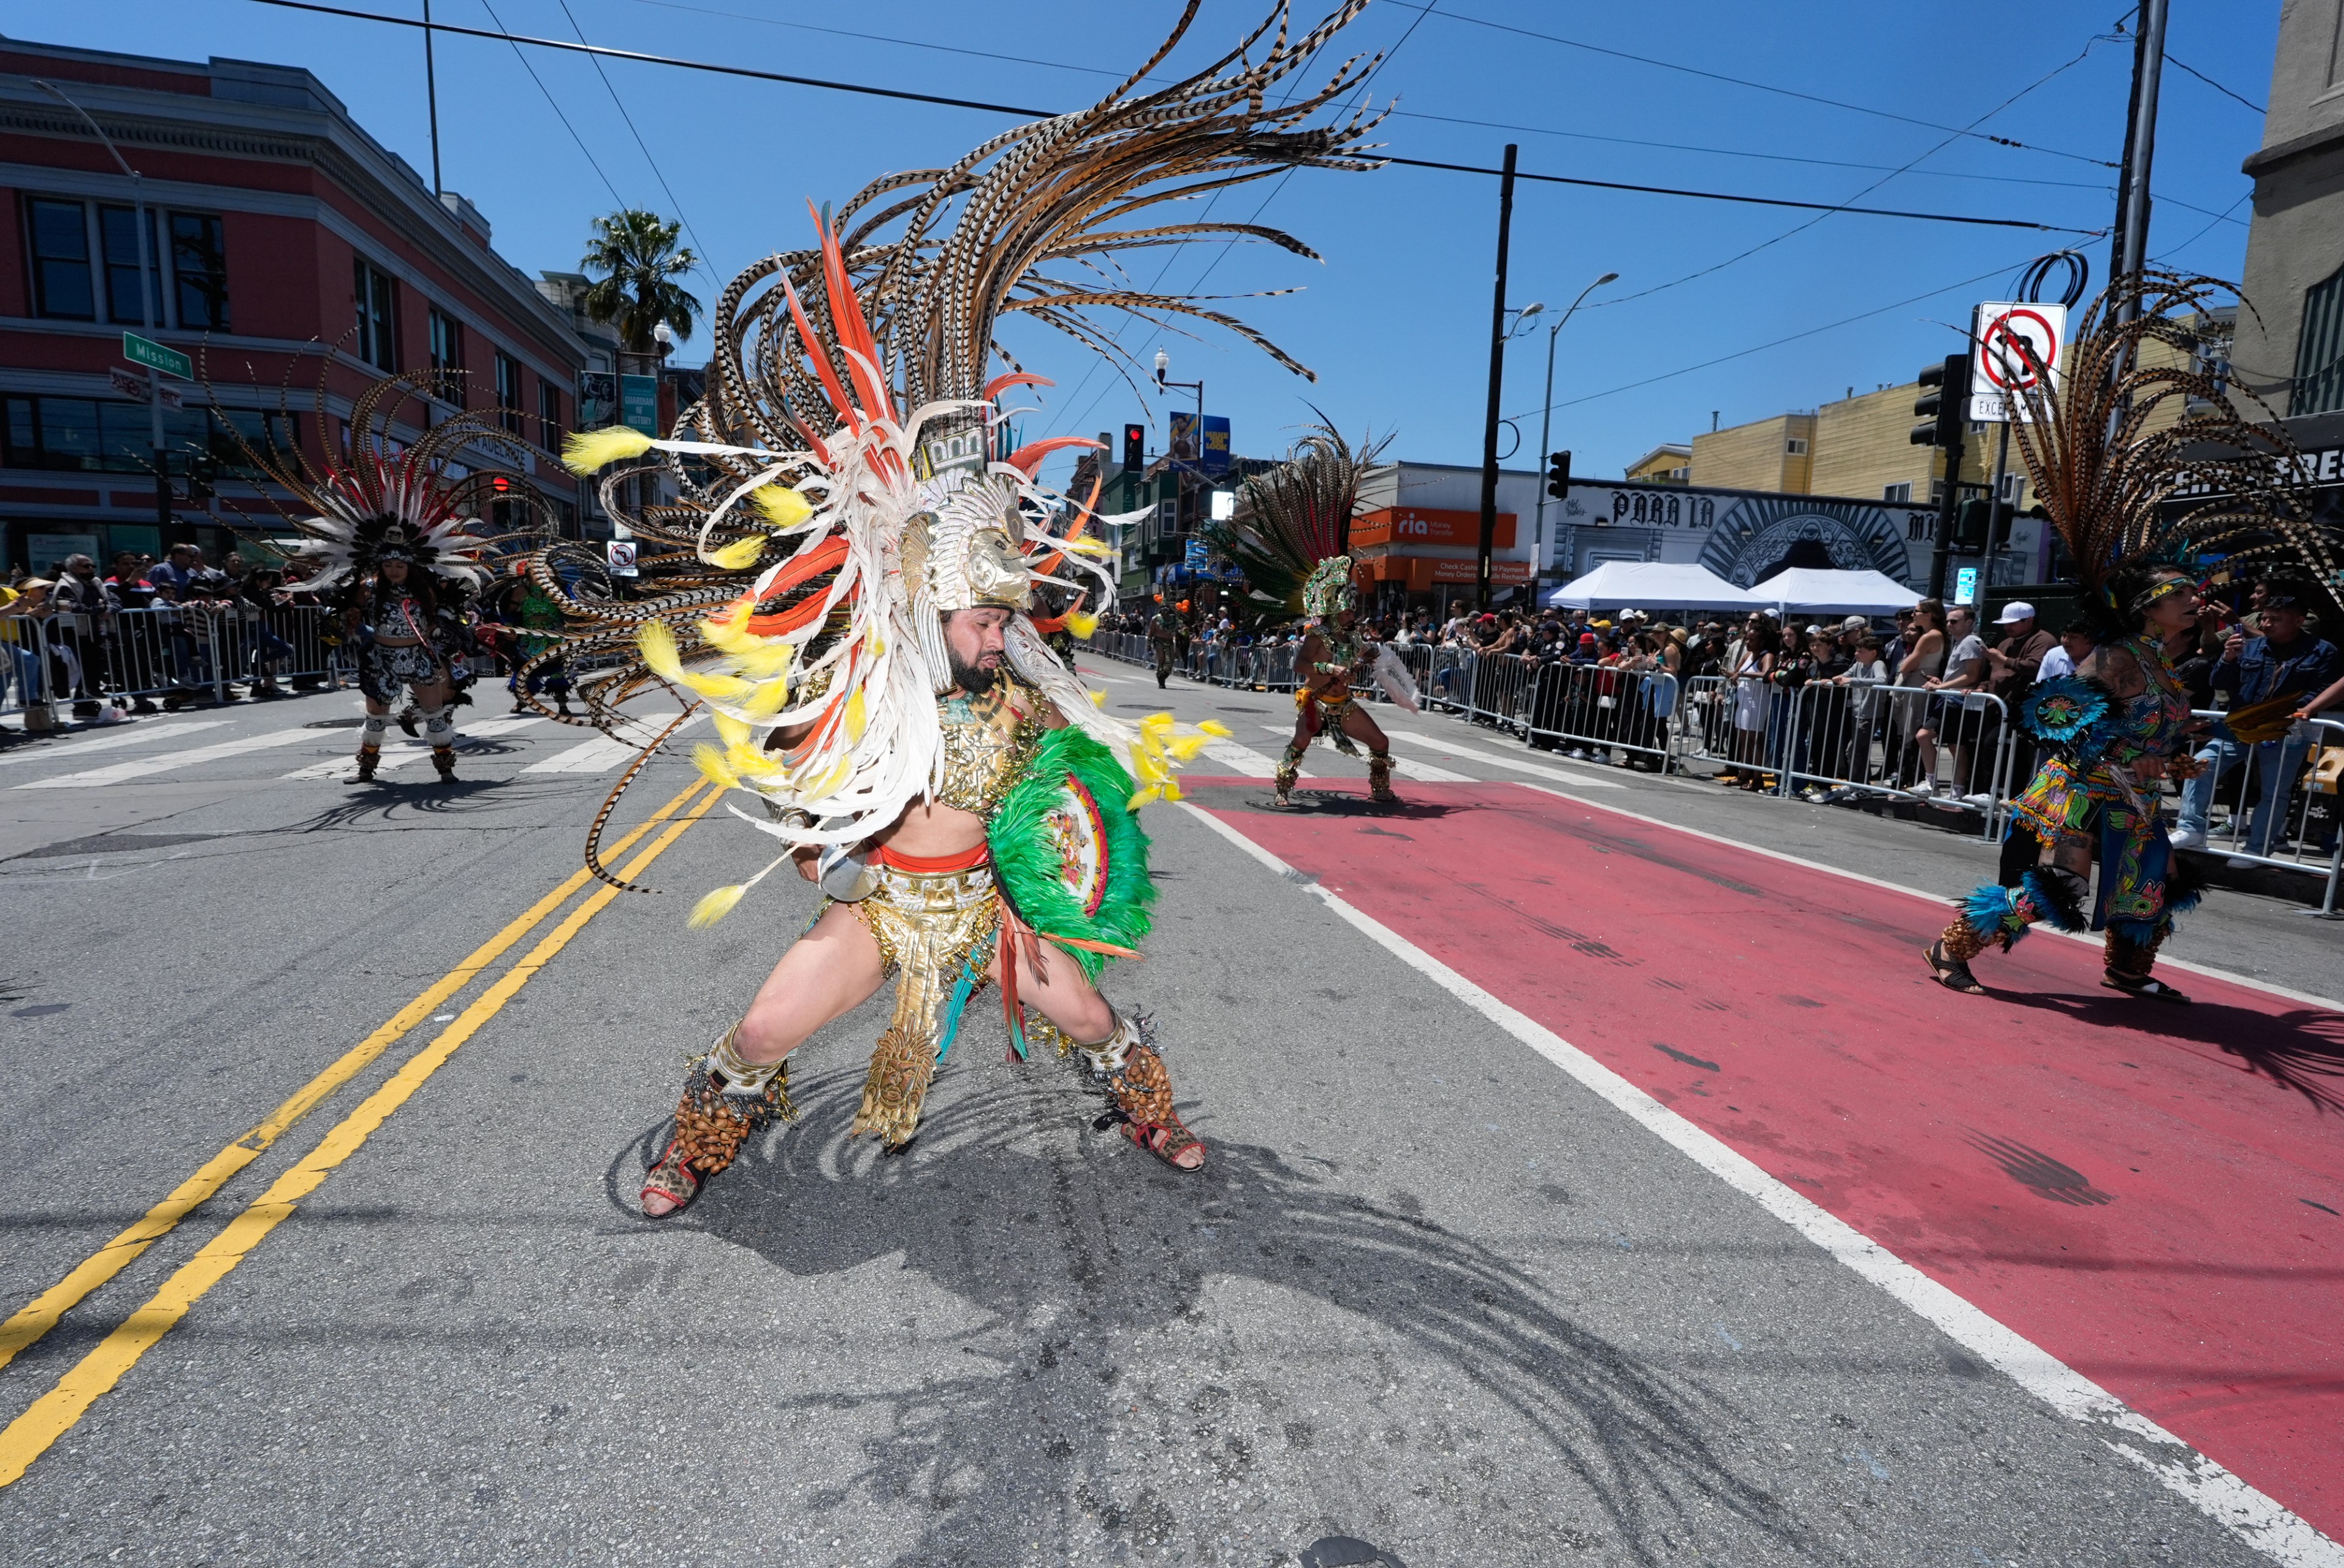 Dancers in vibrant traditional feathered costumes perform in a street parade, while onlookers stand behind barricades along the sidewalk on a sunny day.